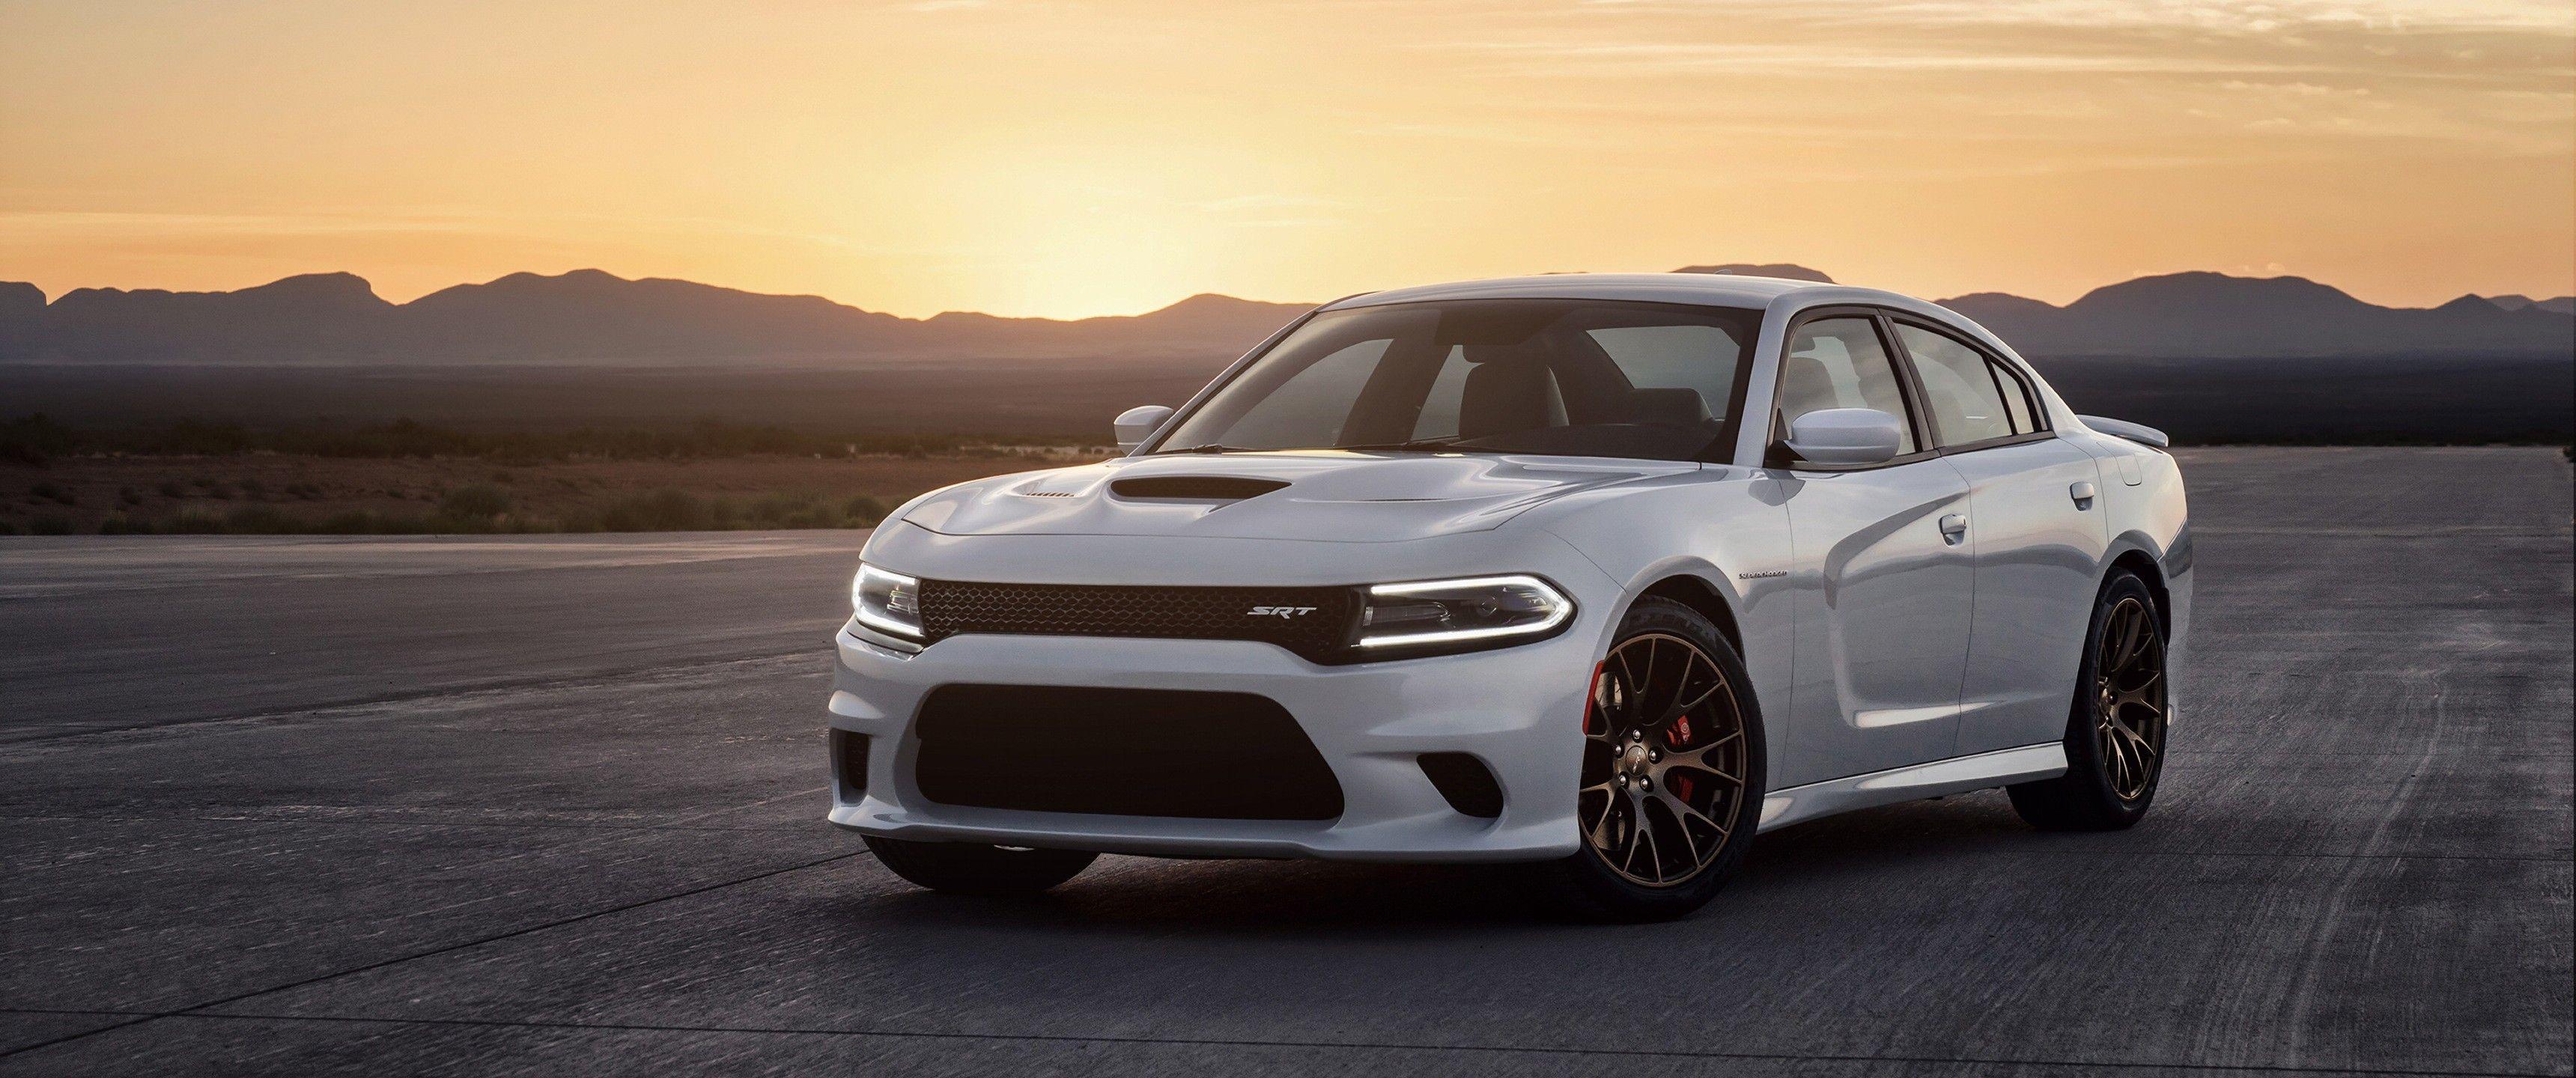 Dodge Charger Wallpapers - Top Free